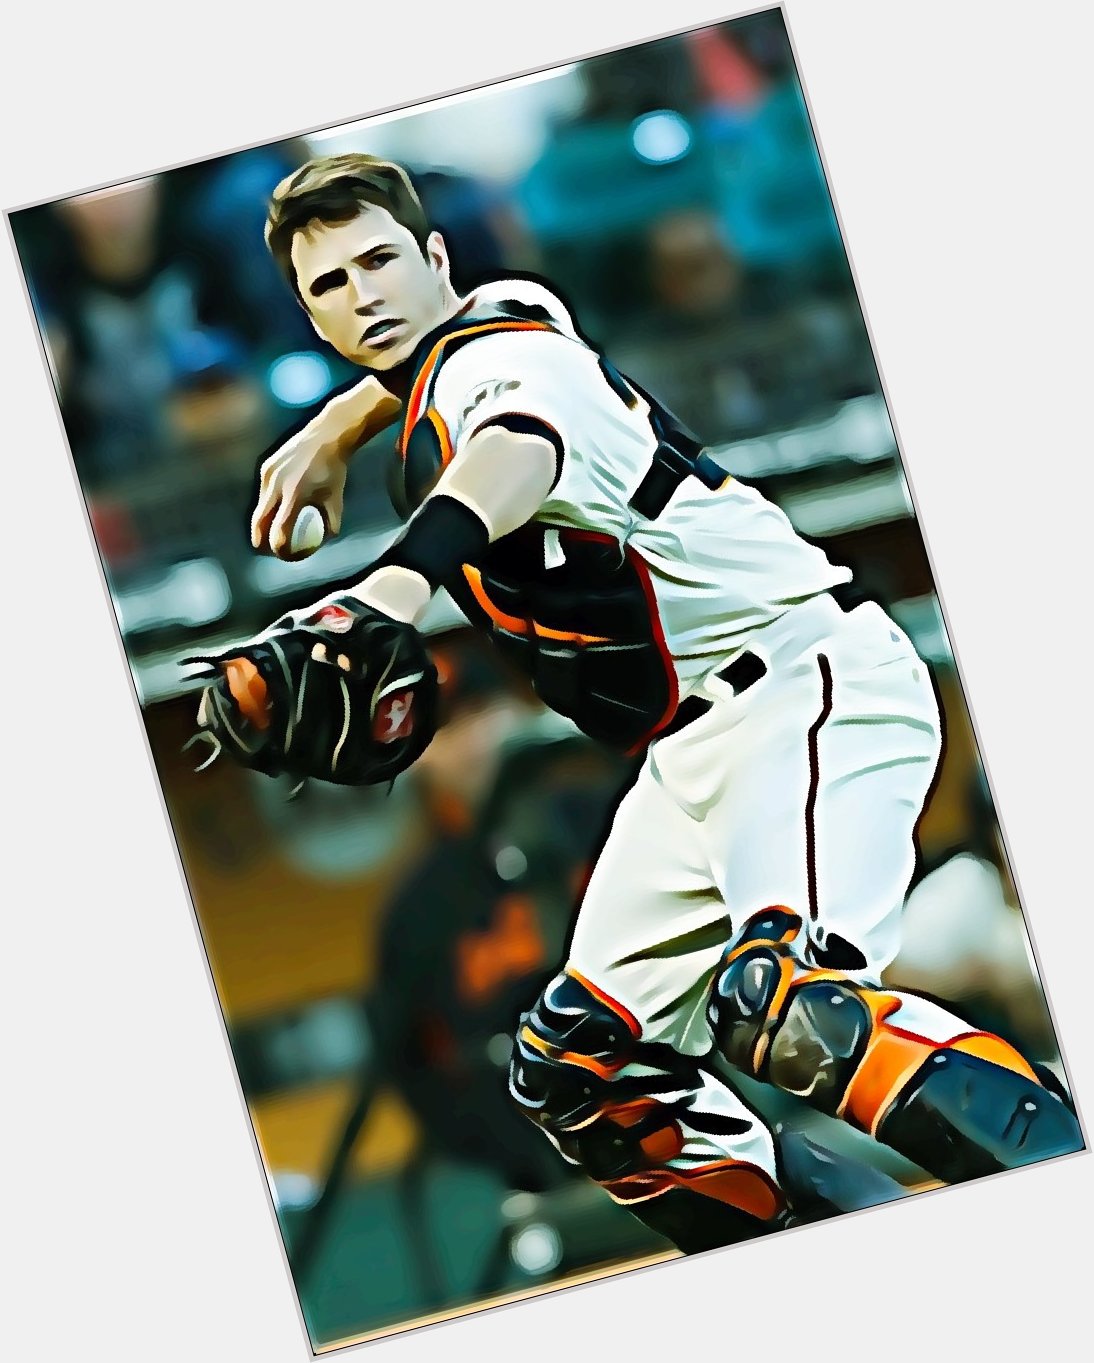 Happy birthday Buster Posey!   